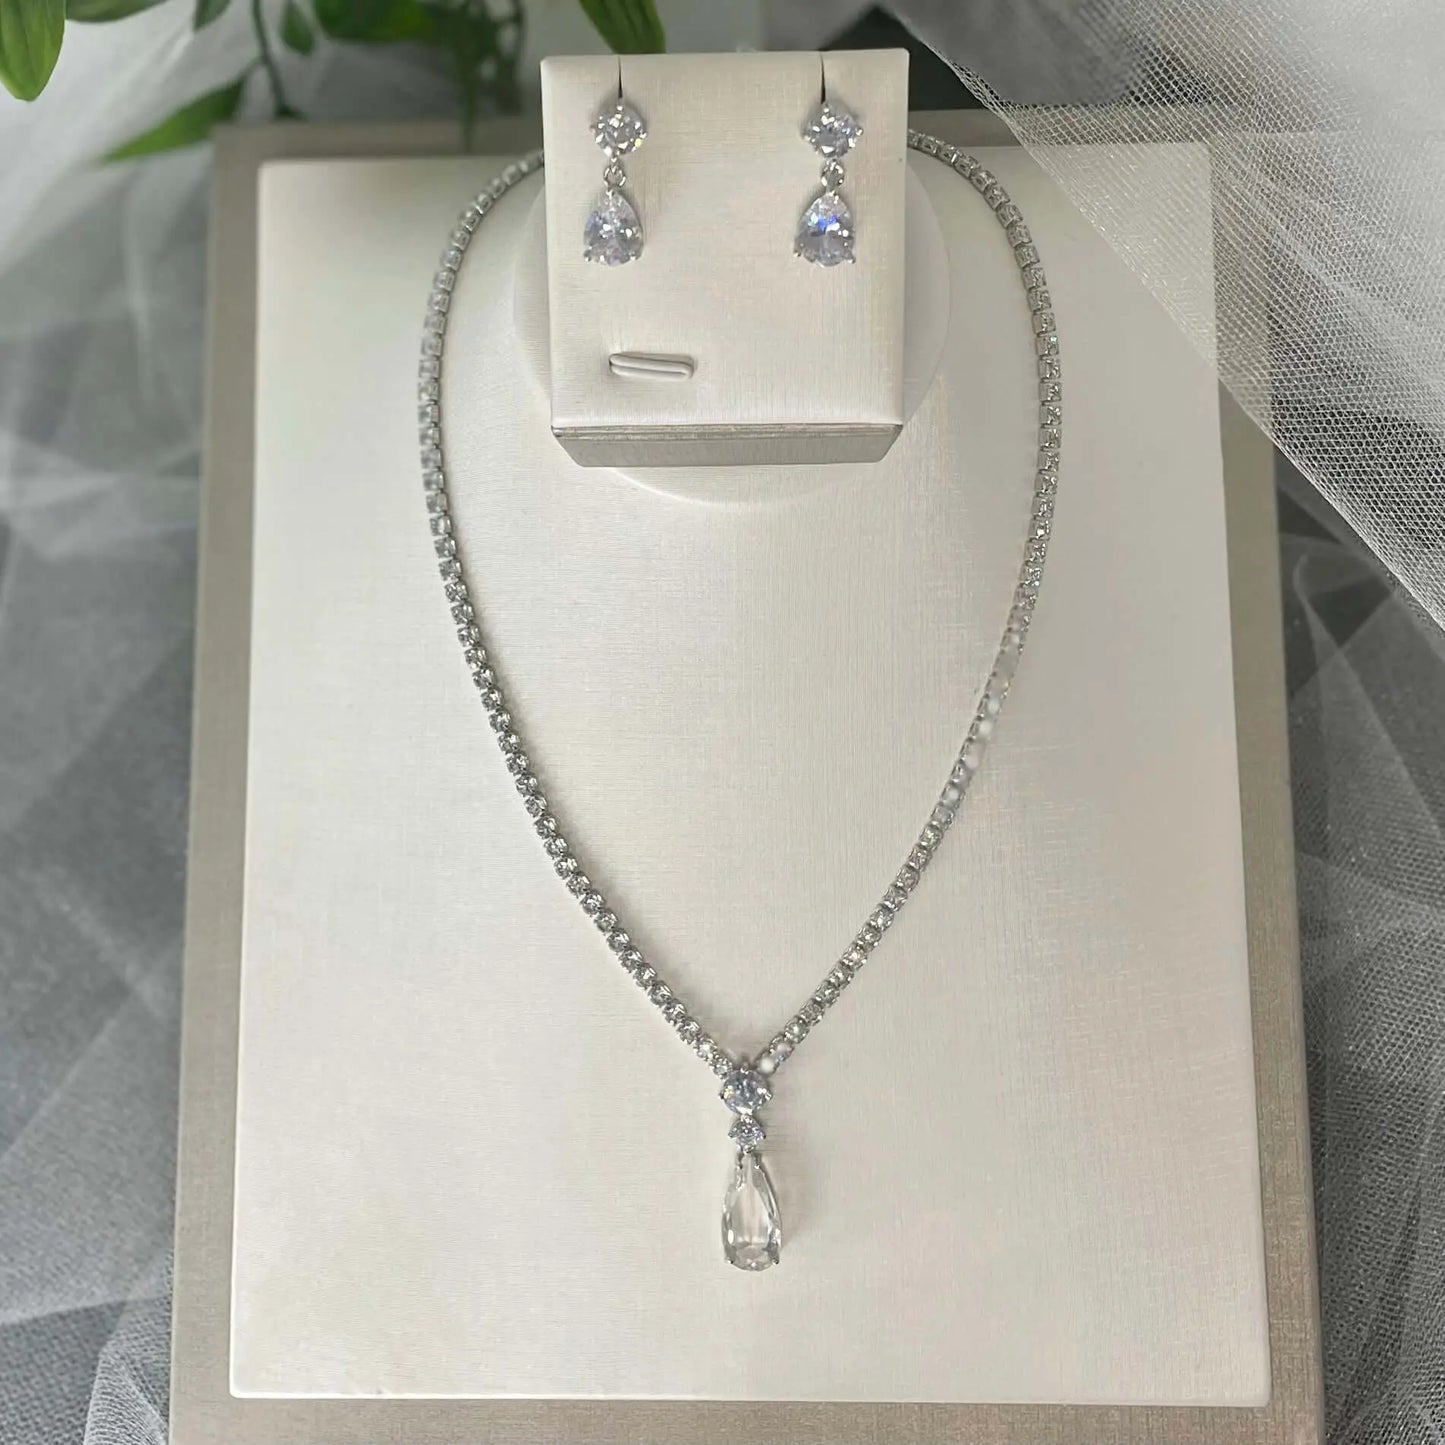 Anita Bridal Jewelry Set featuring a water drop rhinestone pendant and elongated earrings with zirconia crystals, silver-plated for a lasting shine, perfect for weddings and special occasions.